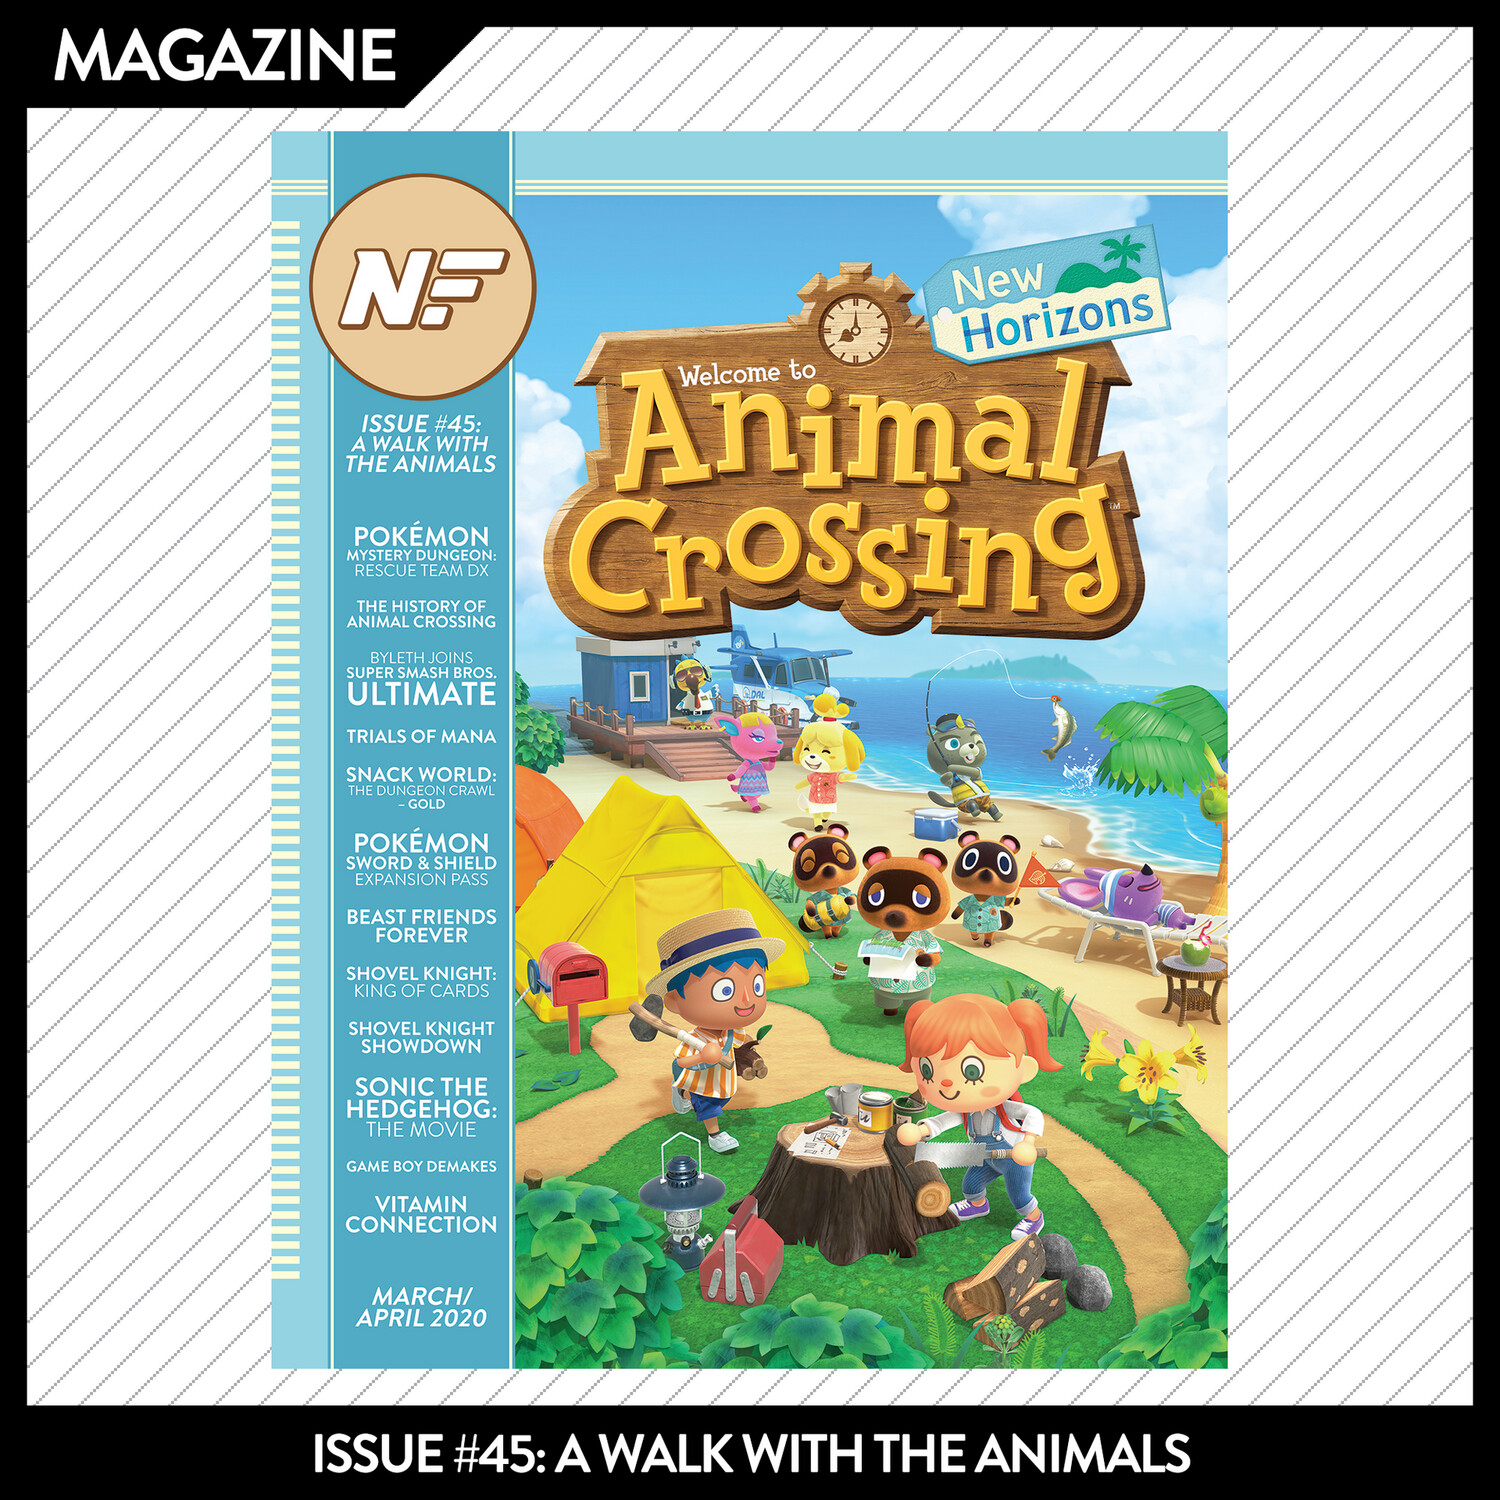 Issue #45: A Walk with the Animals – March/April 2020